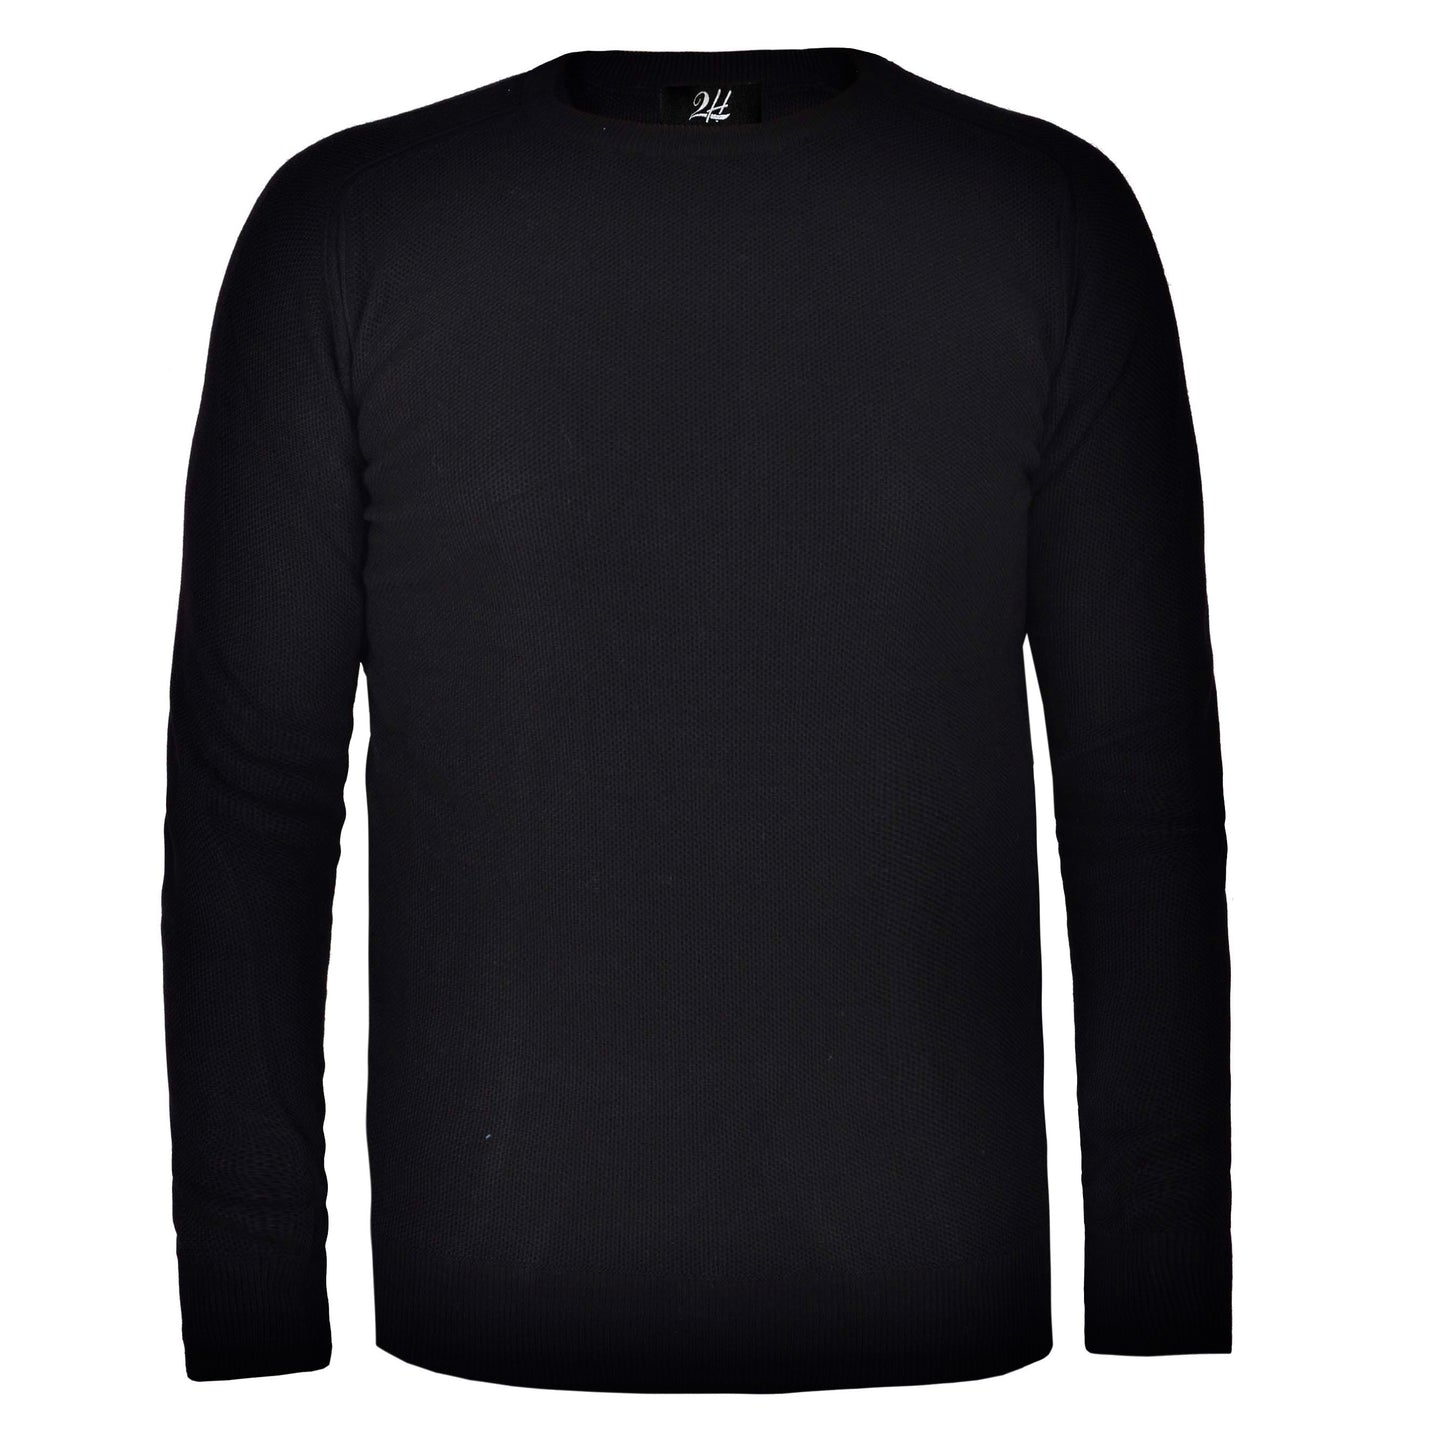 2H Black Knitted Round Neck Sweater